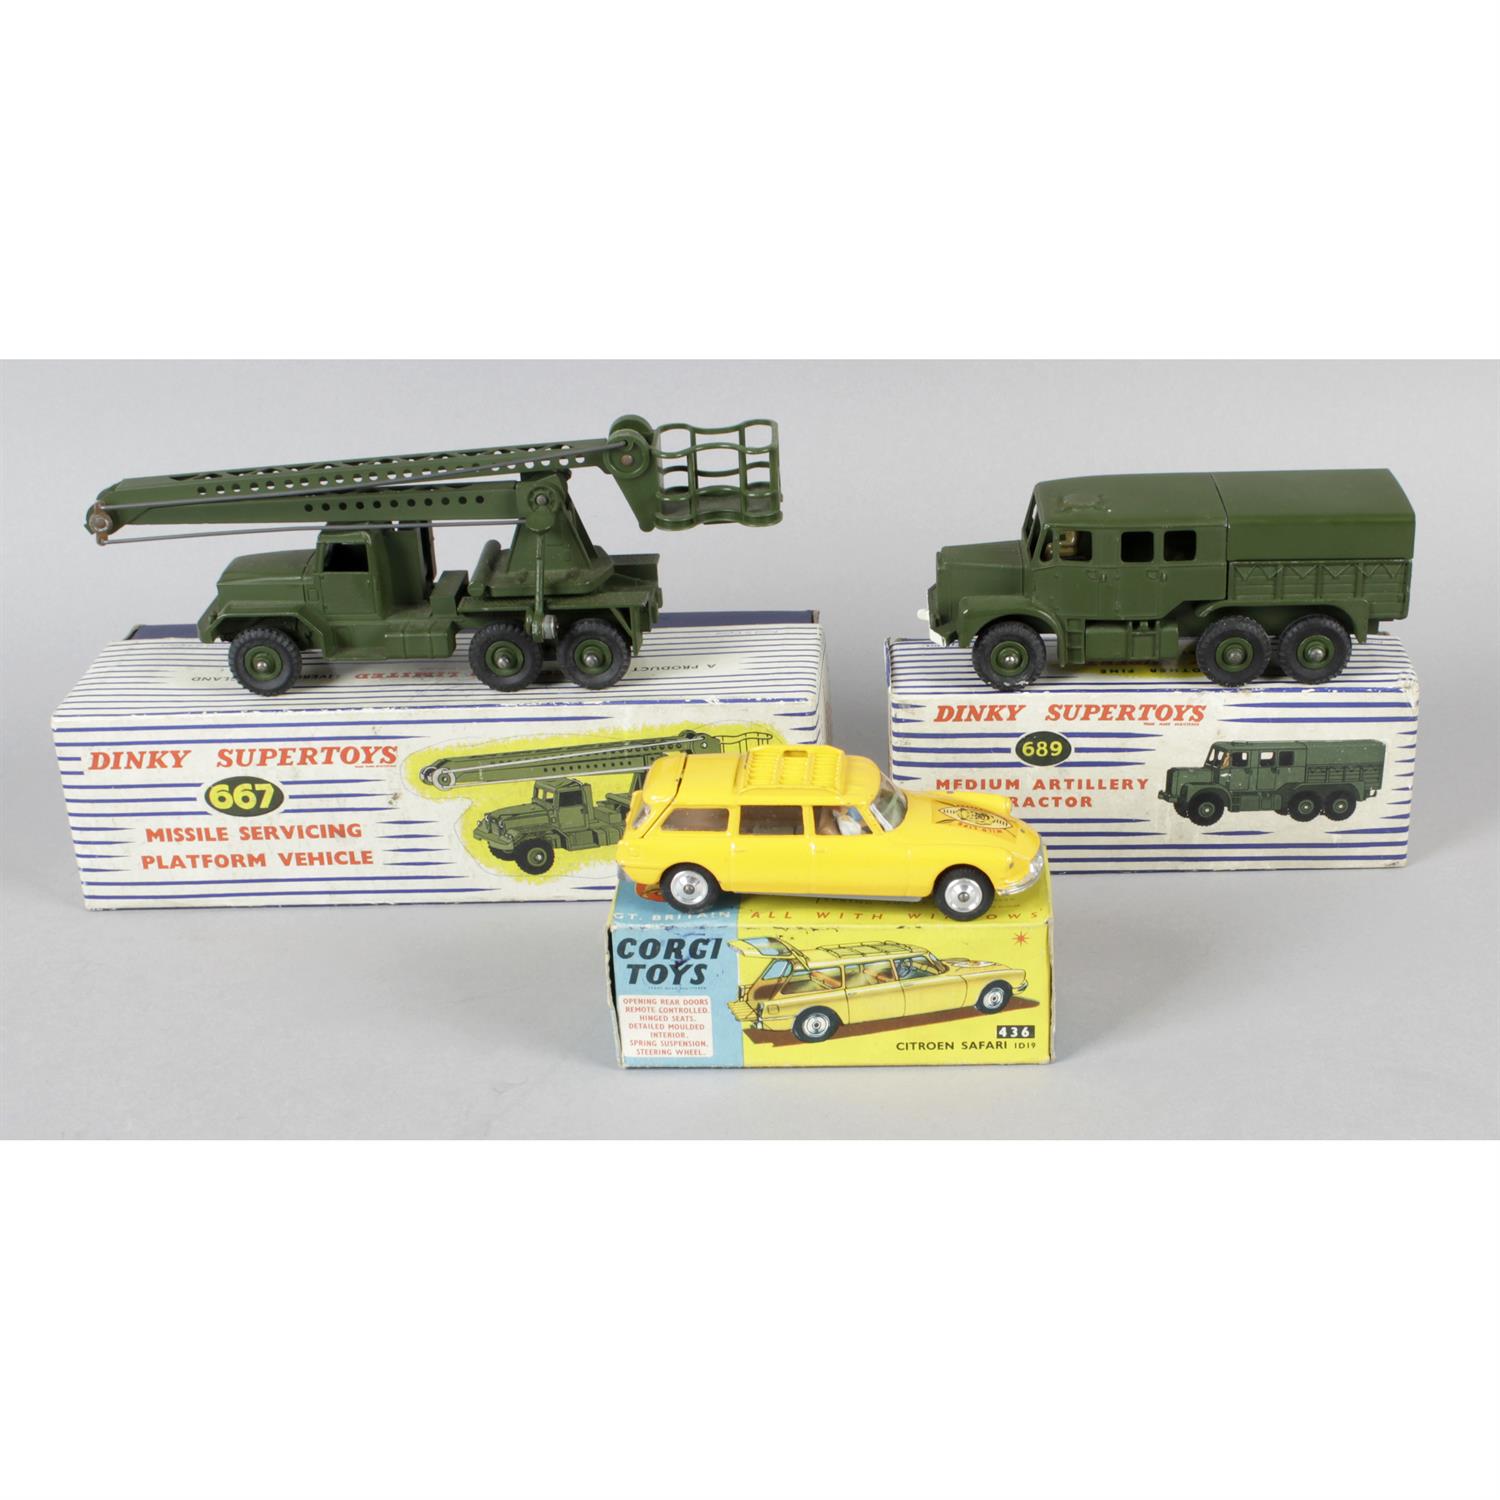 Two boxed Dinky toy models and a Corgi toy model.